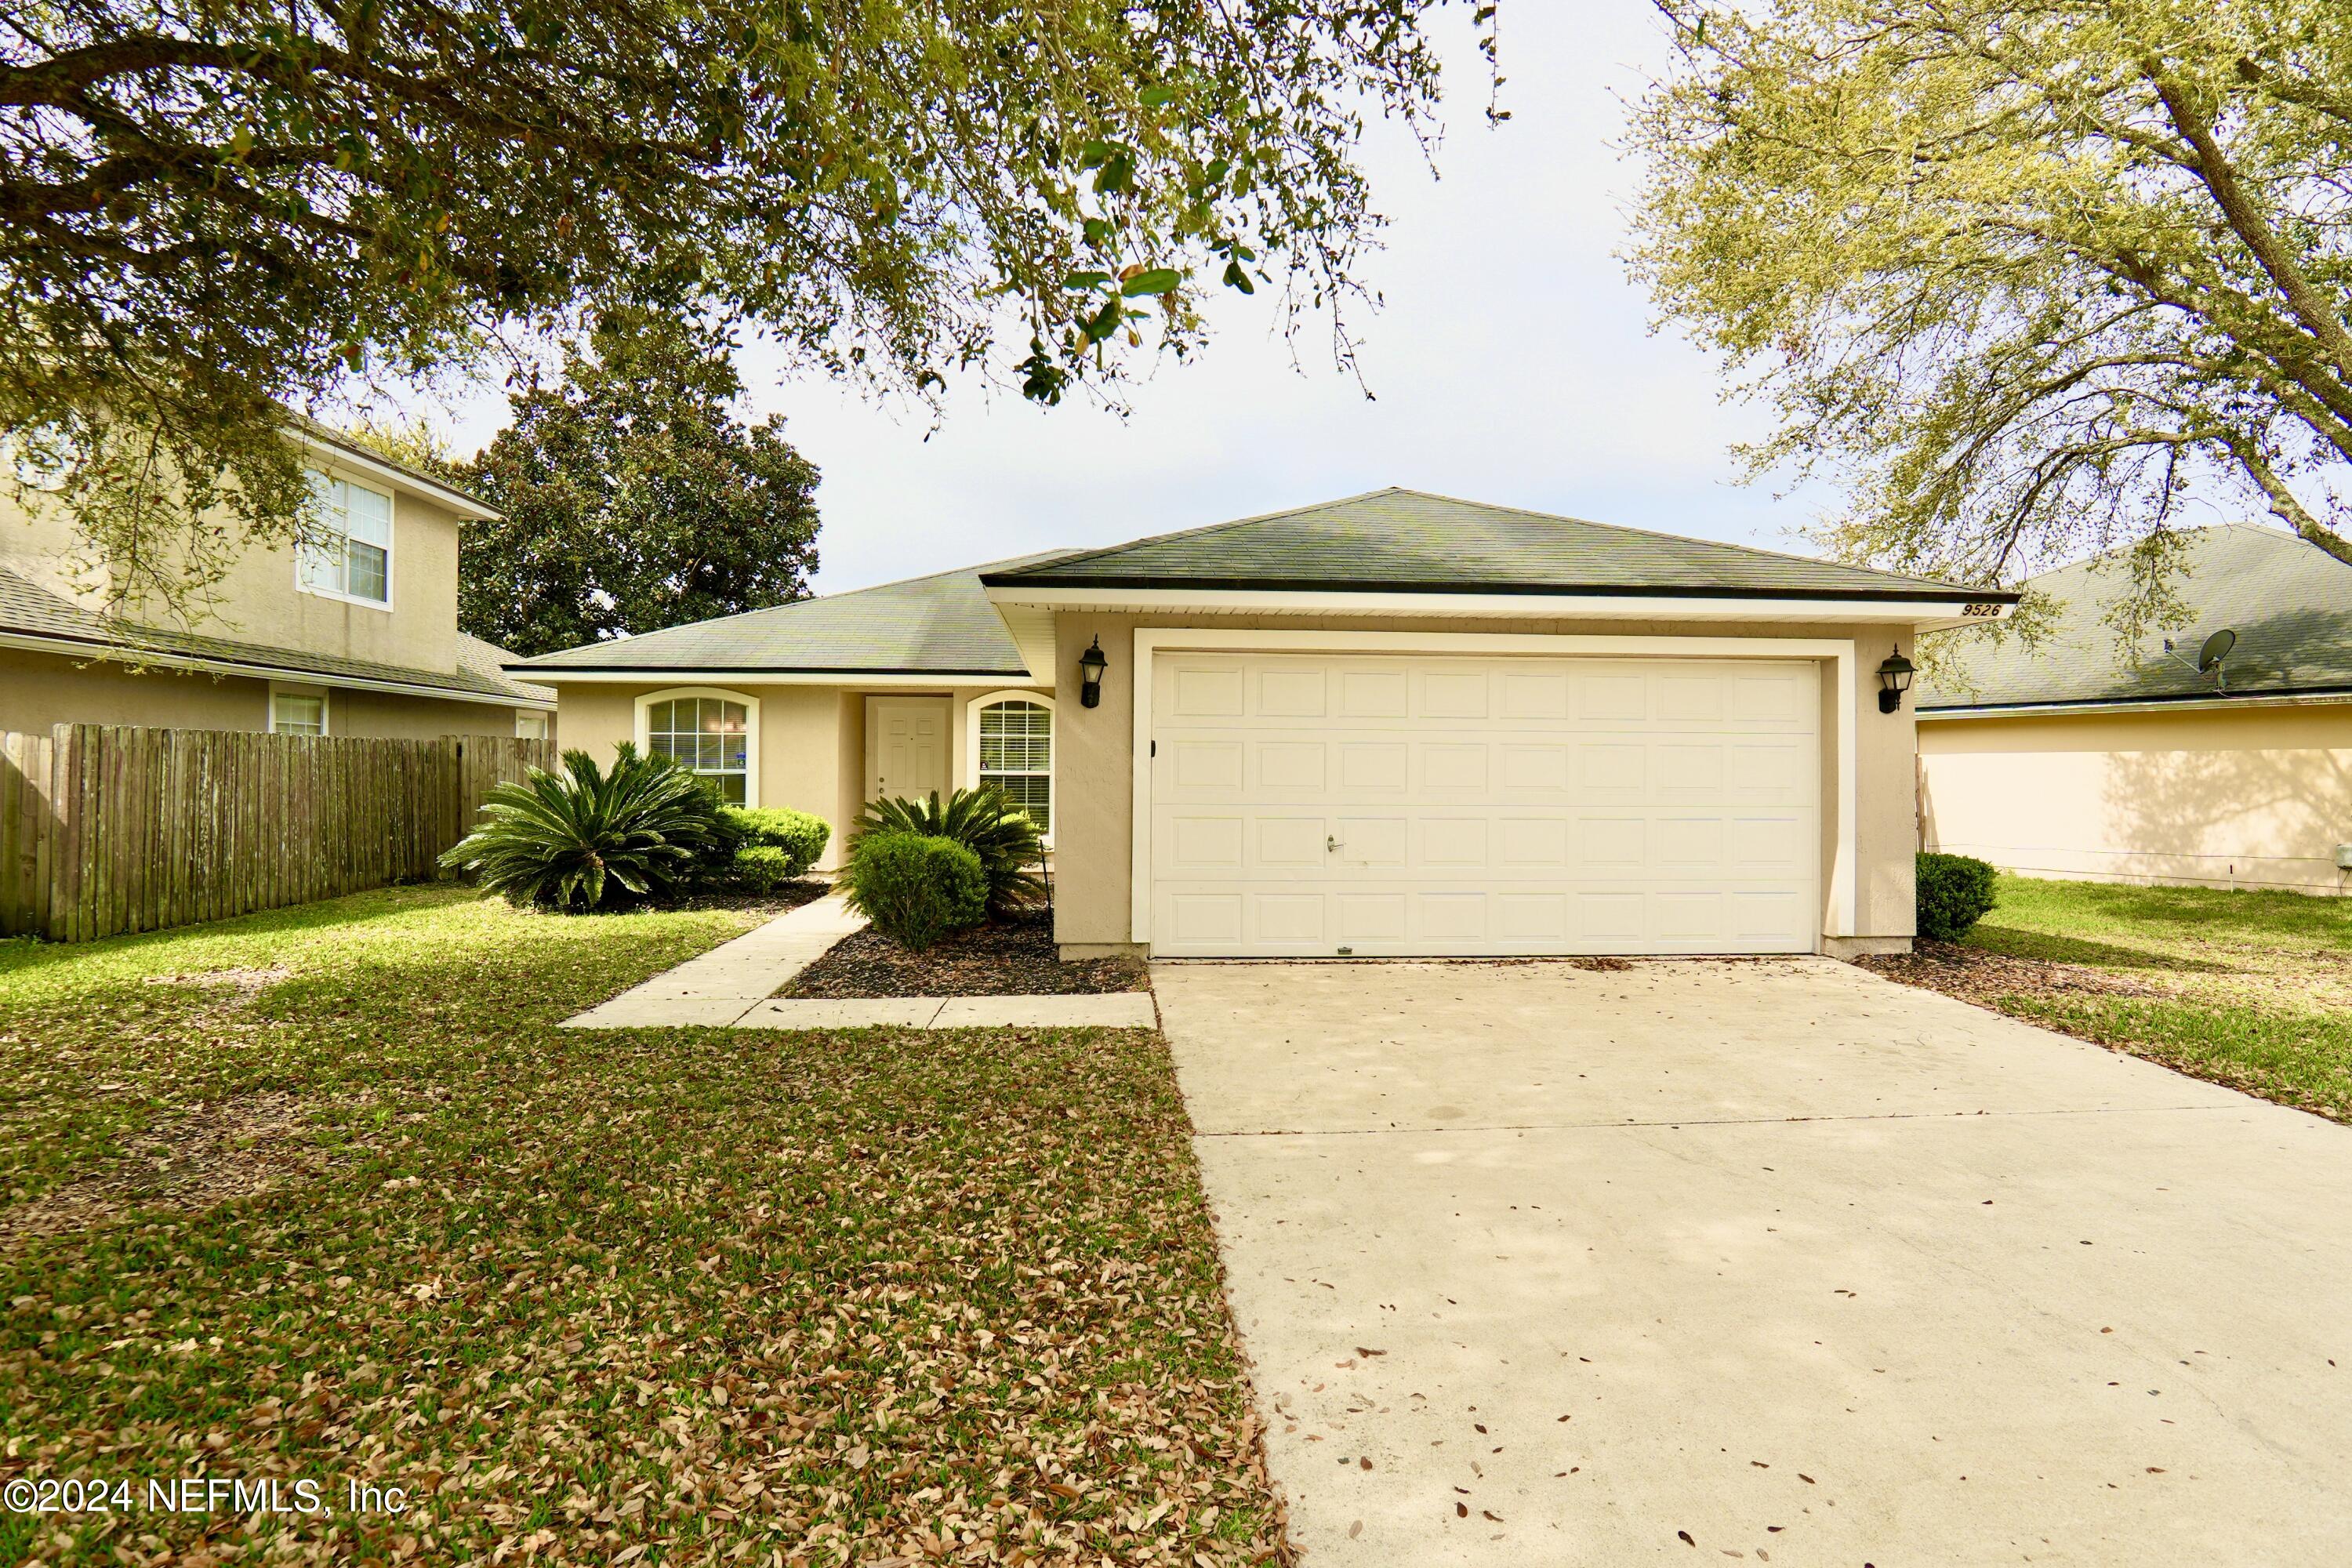 Jacksonville, FL home for sale located at 9526 STAPLES MILL Drive, Jacksonville, FL 32244